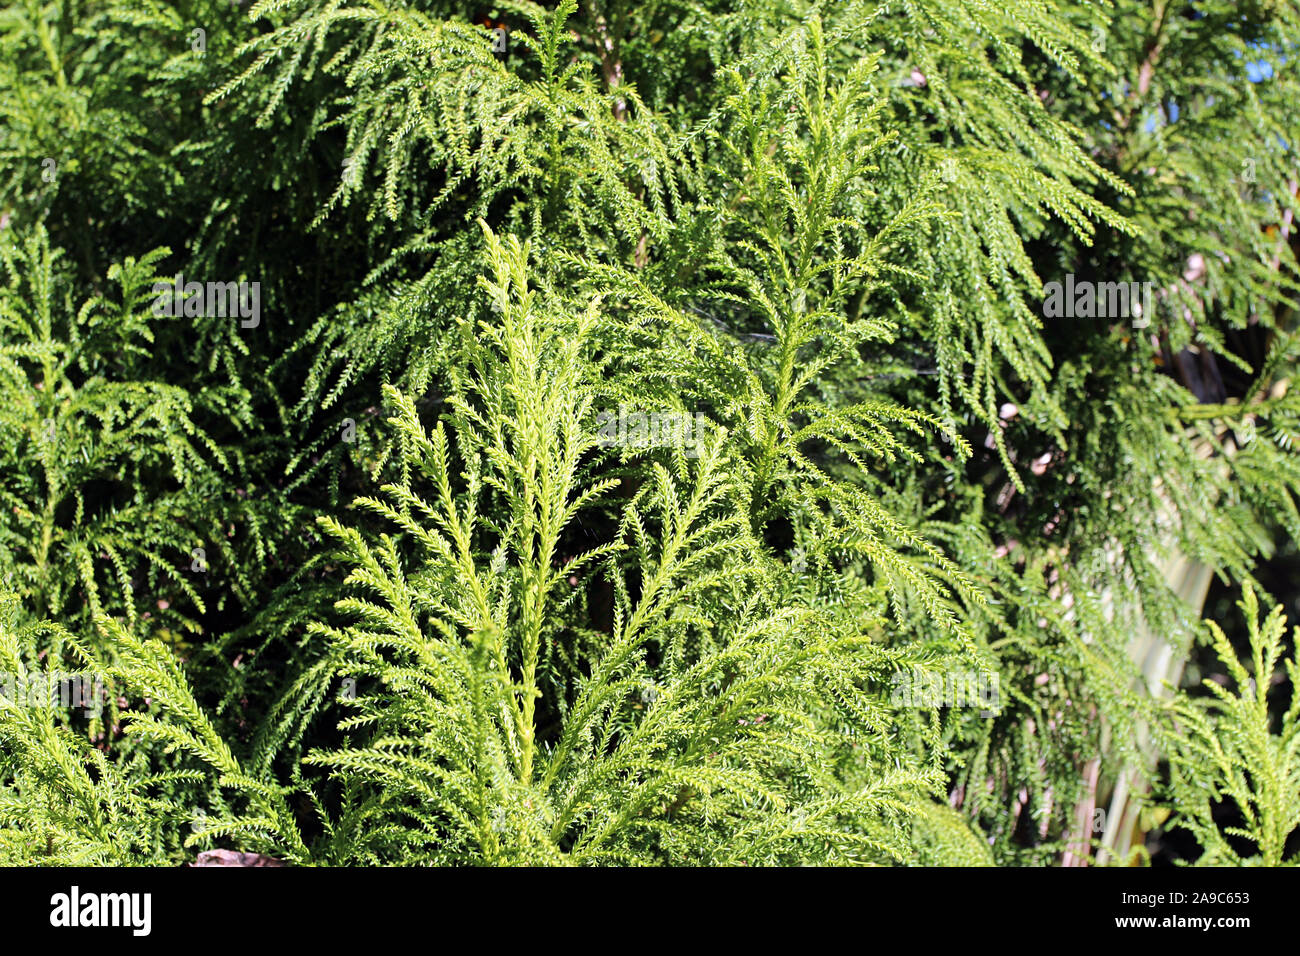 Close up of branches of a Dwarf Japanese Cedar tree, Cryptomeria japonica, in North Carolina, USA Stock Photo